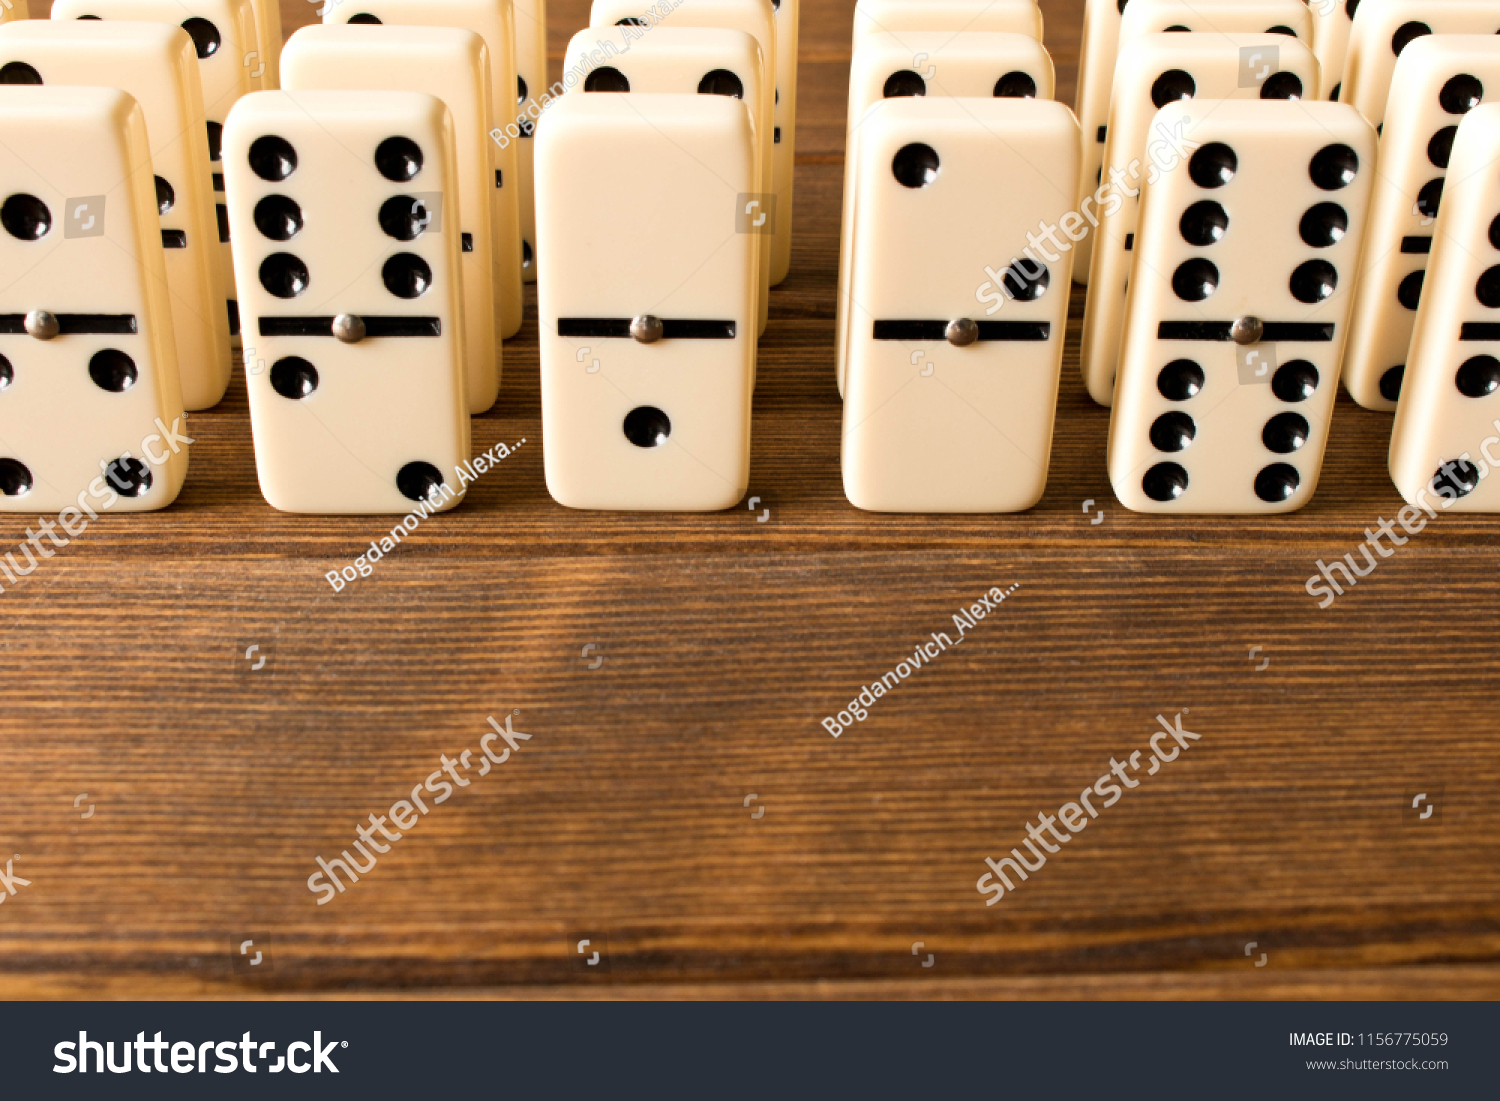 Playing dominoes on a wooden table. Close up. Dominoes game conc #1156775059